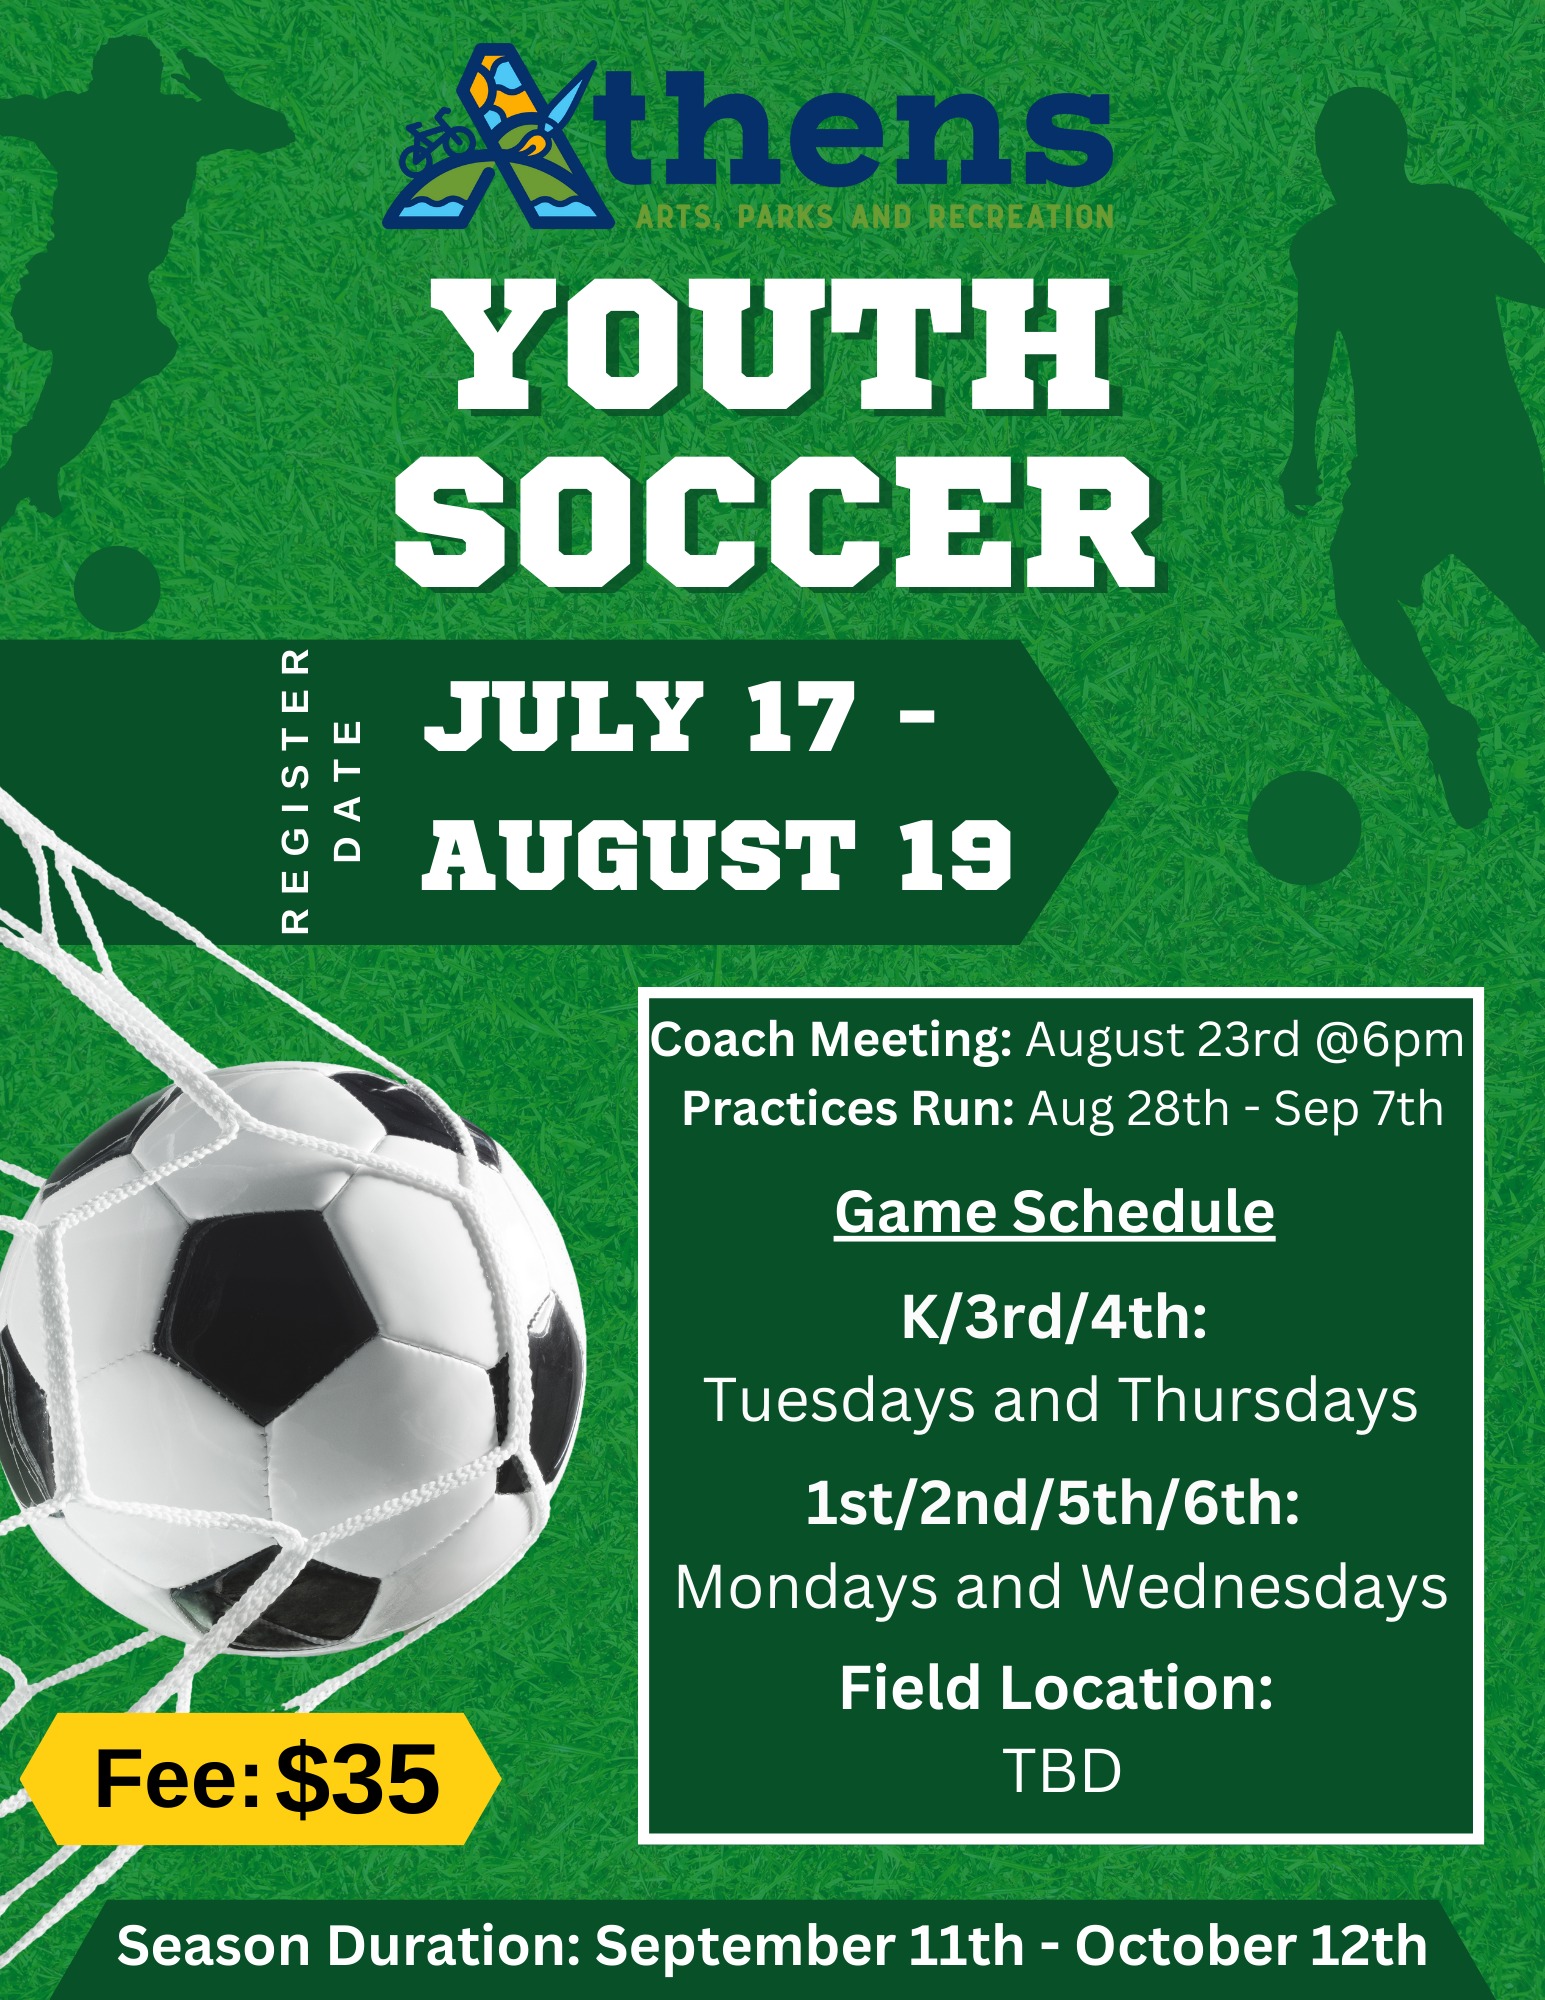 A flyer for Athens Youth Soccer registration. The flyer is green and has a picture of a soccer ball on it.